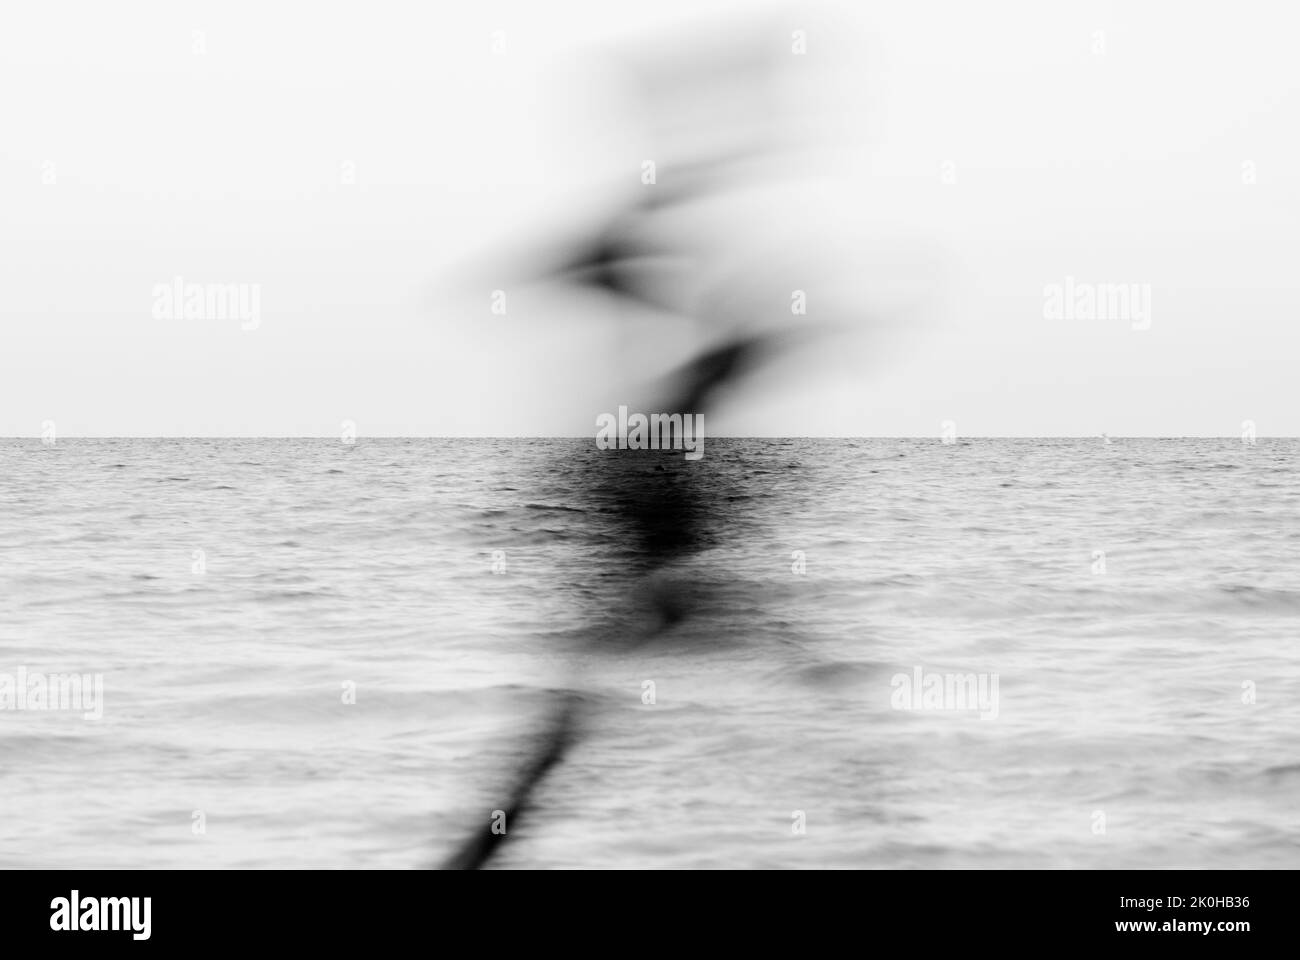 Concept of a human walking near the sea Stock Photo